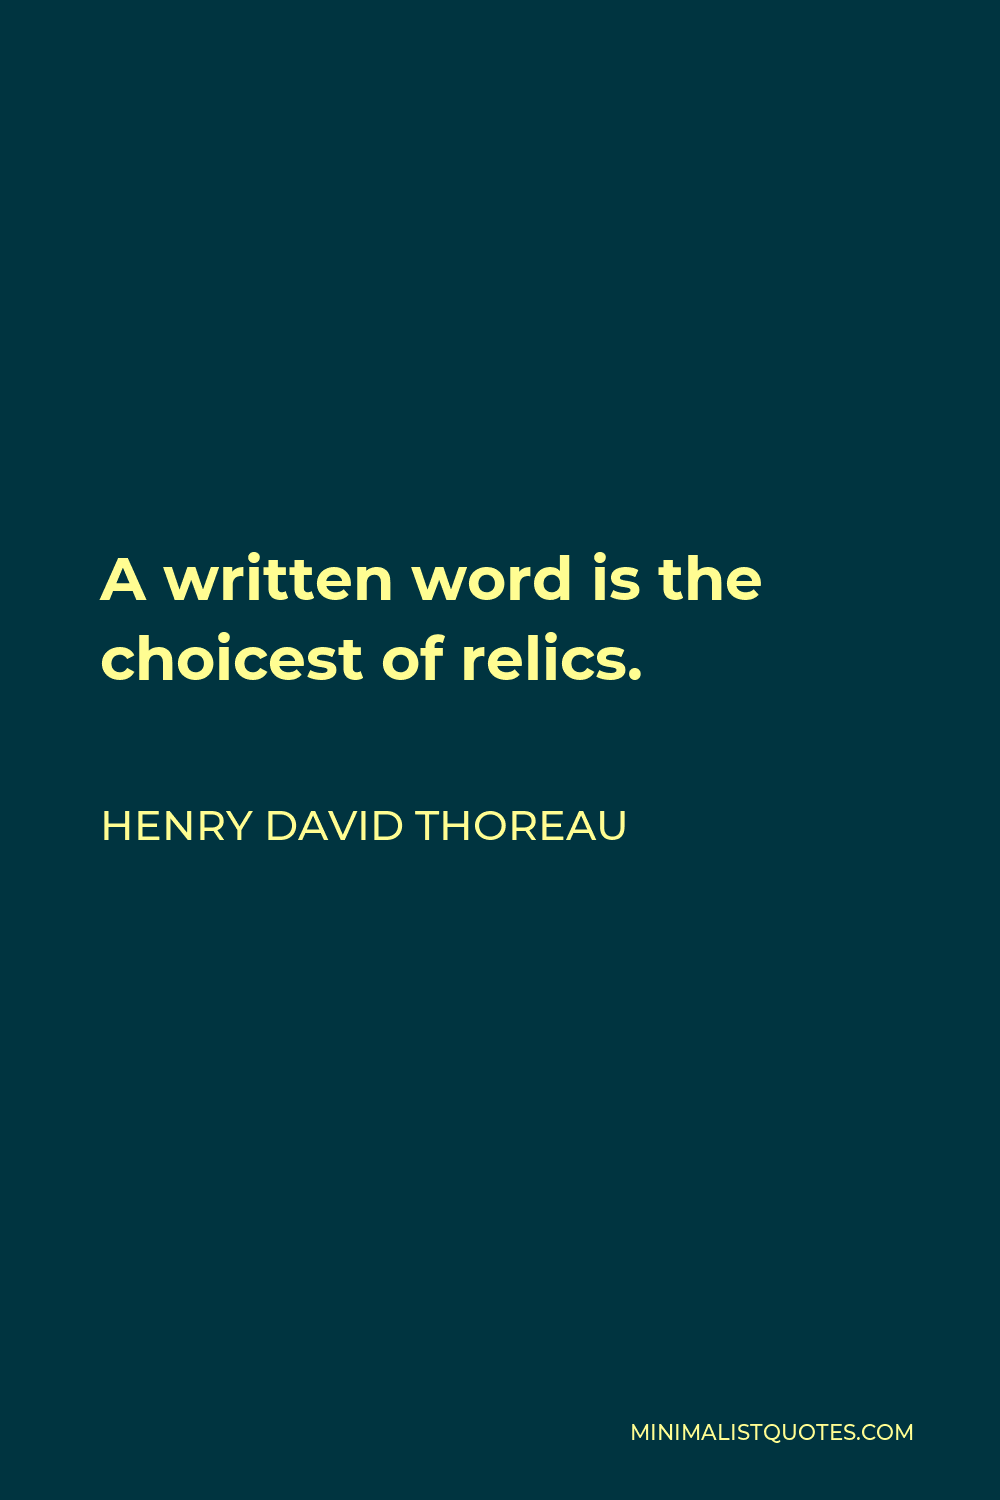 Henry David Thoreau Quote - A written word is the choicest of relics.